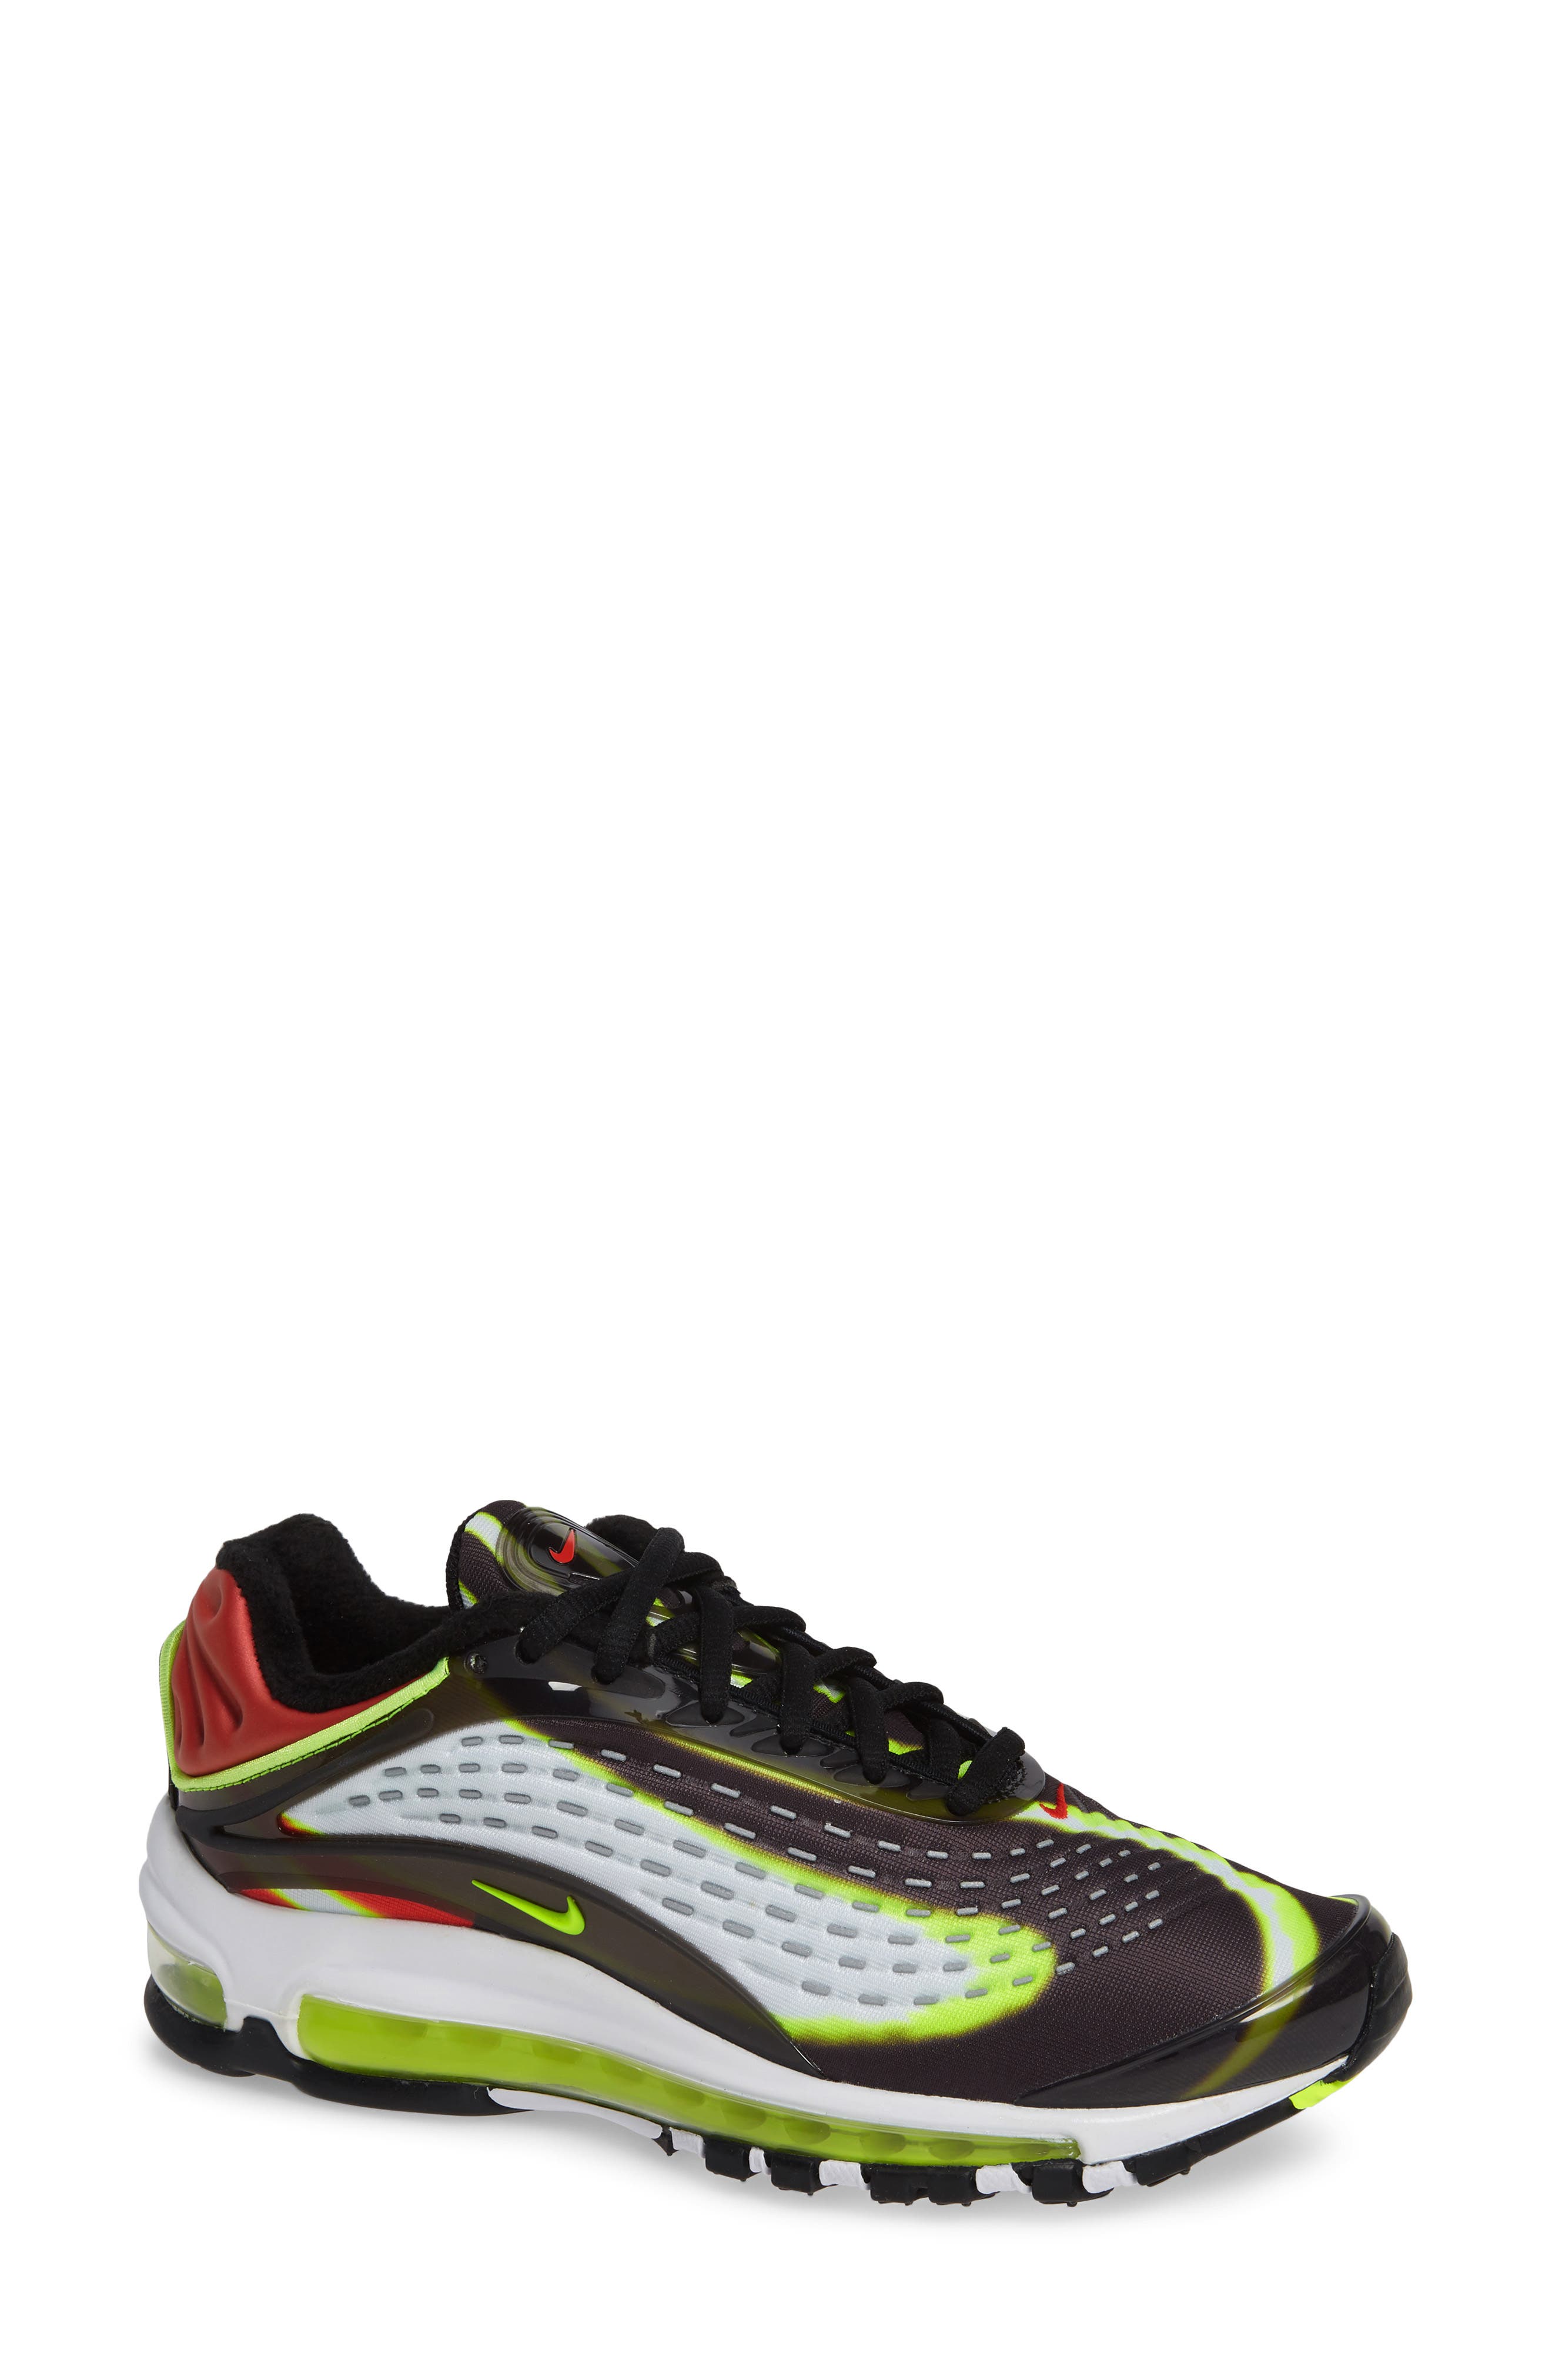 nike air max deluxe amazon